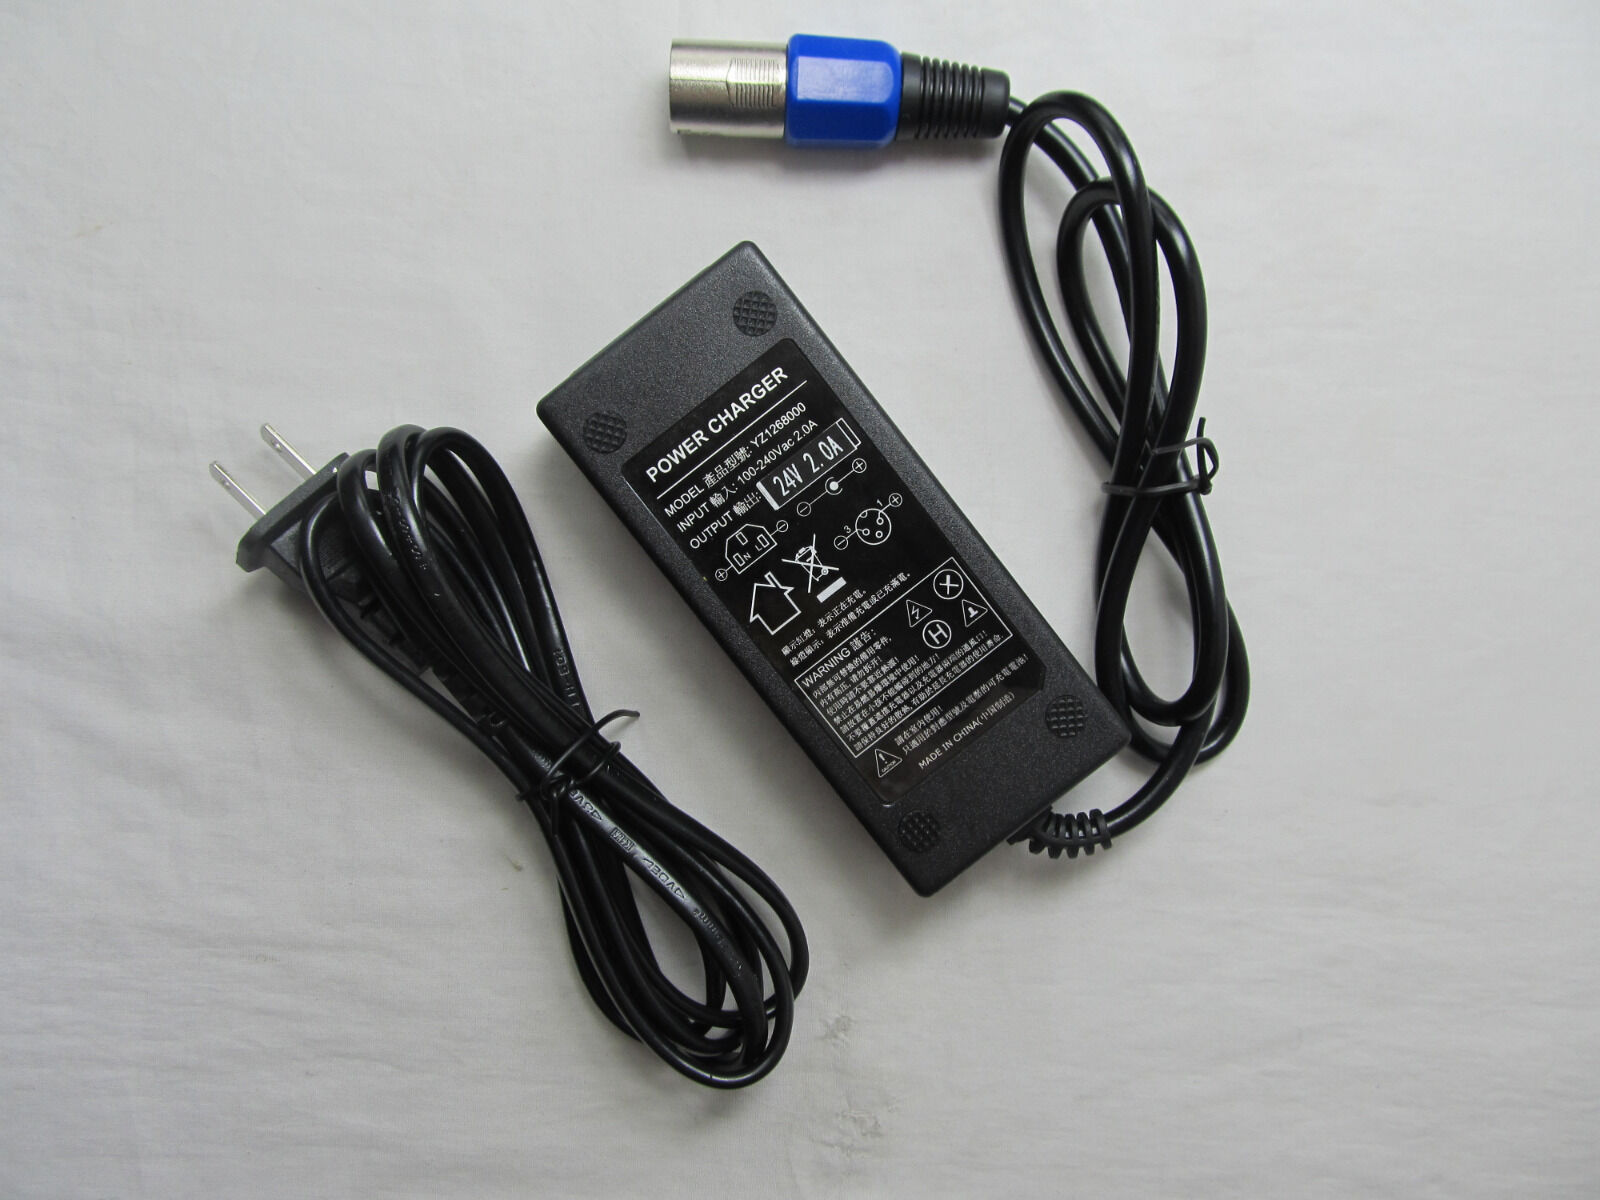 24V 2A New Electric Scooter Battery Charger for Go-Go Elite Traveller